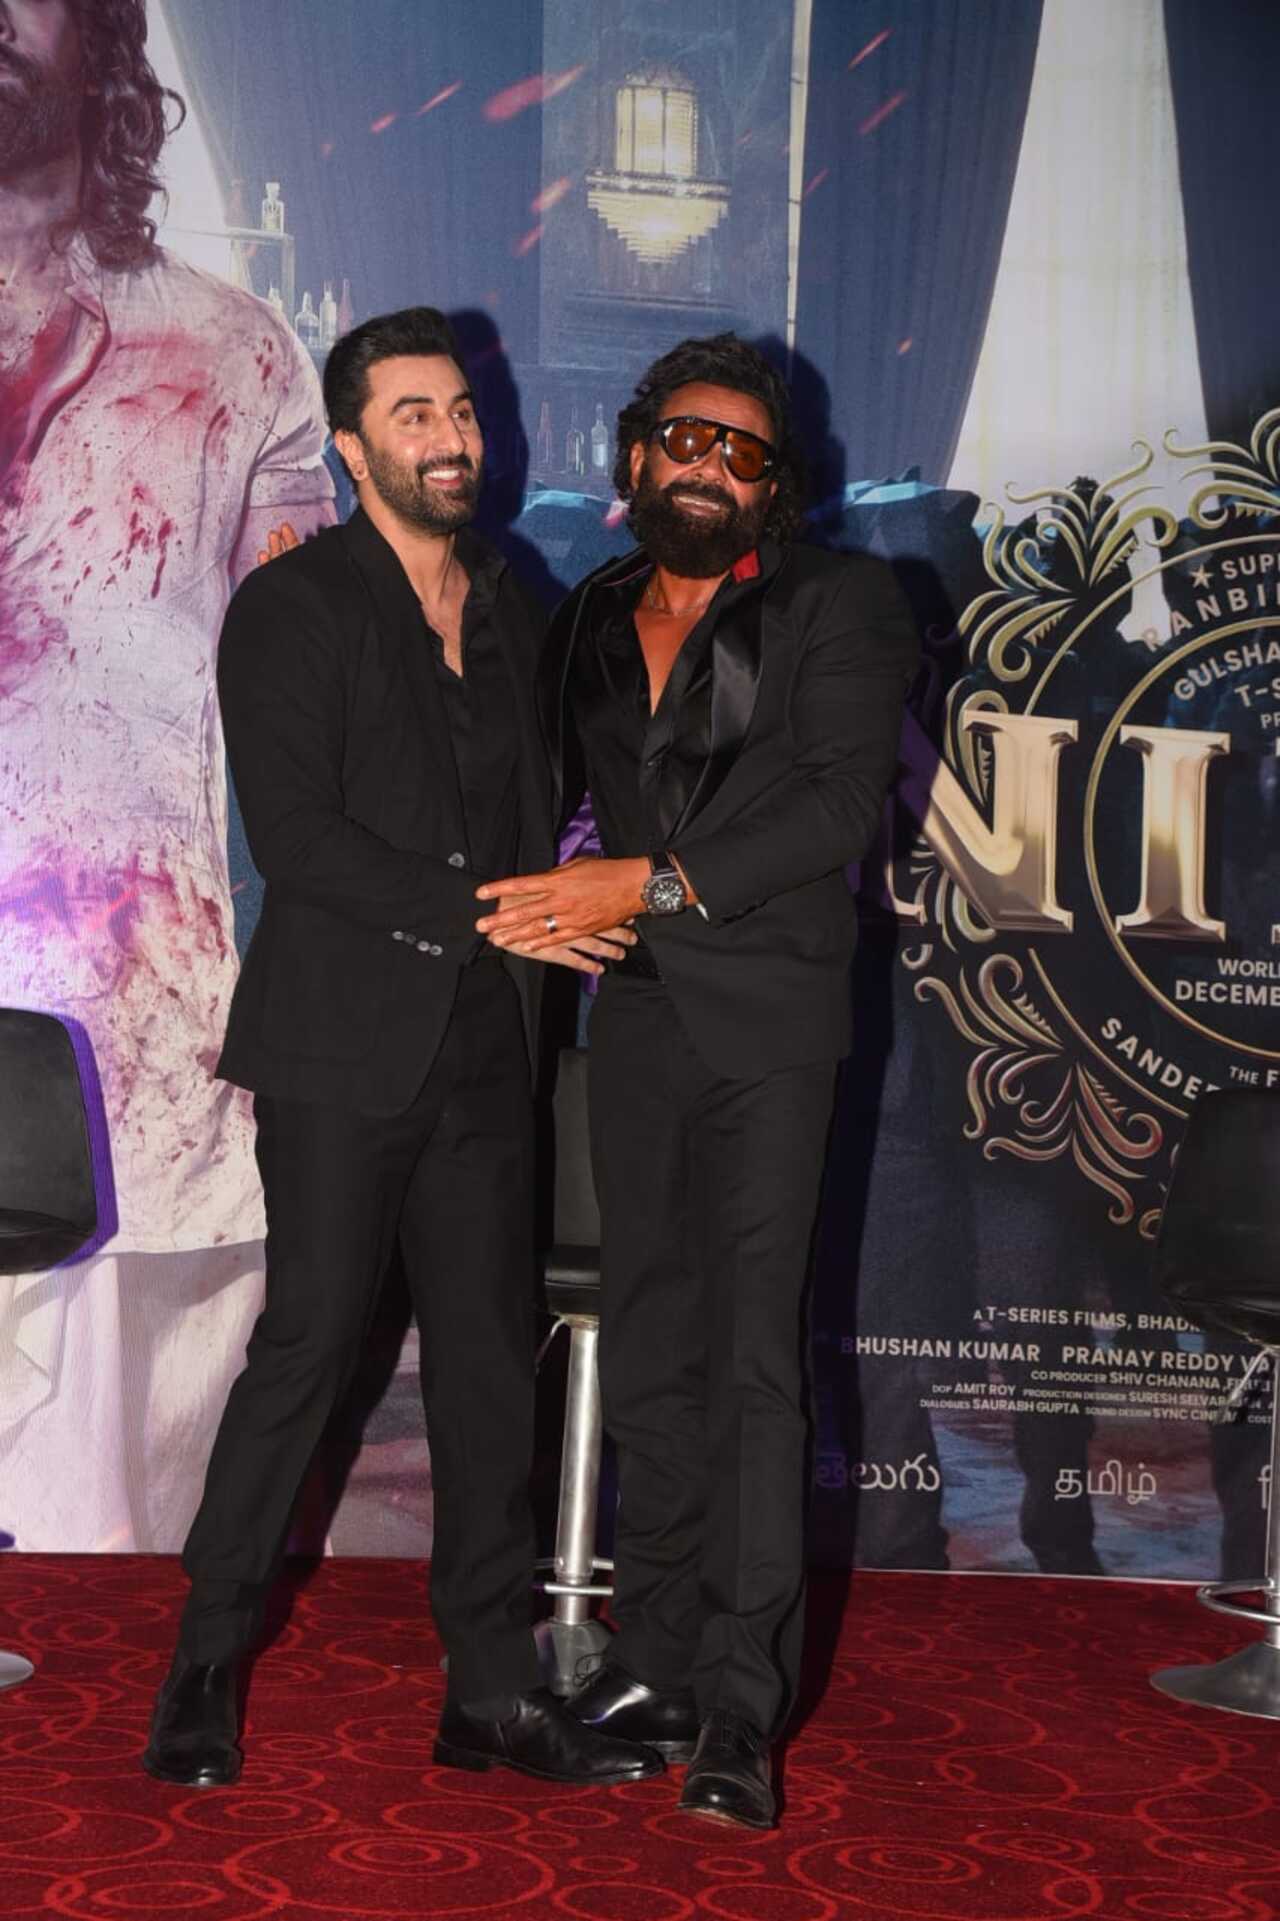 Enemies on screen, good friends off the screen- Ranbir and Bobby embrace and laugh at the trailer launch. Bobby, reportedly, plays a mute character. His silent villain act is one of the exciting elements of the film